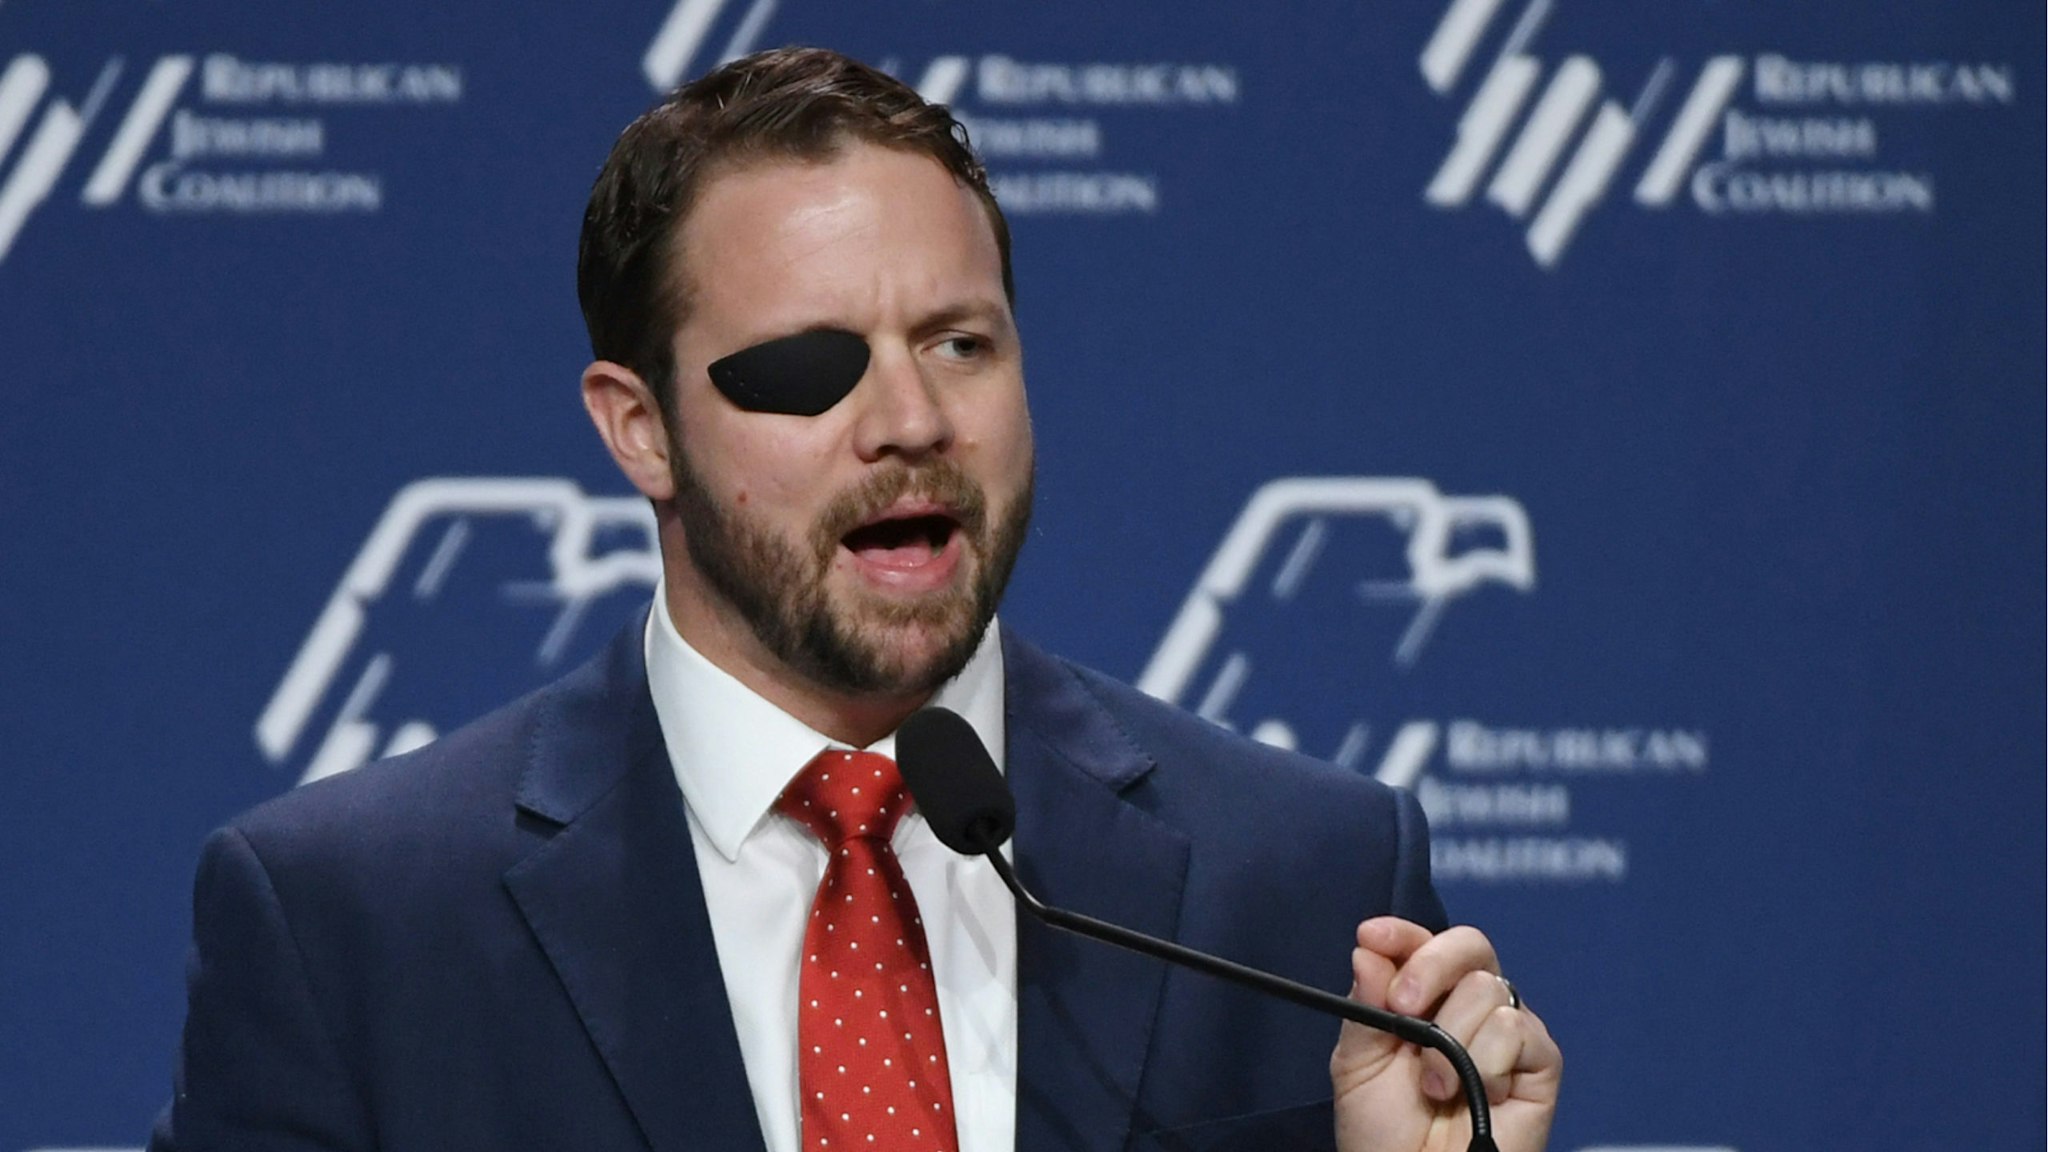 U.S. Rep. Dan Crenshaw (R-TX) speaks at the Republican Jewish Coalition's annual leadership meeting at The Venetian Las Vegas after appearances by U.S. President Donald Trump and Vice President Mike Pence on April 6, 2019 in Las Vegas, Nevada.